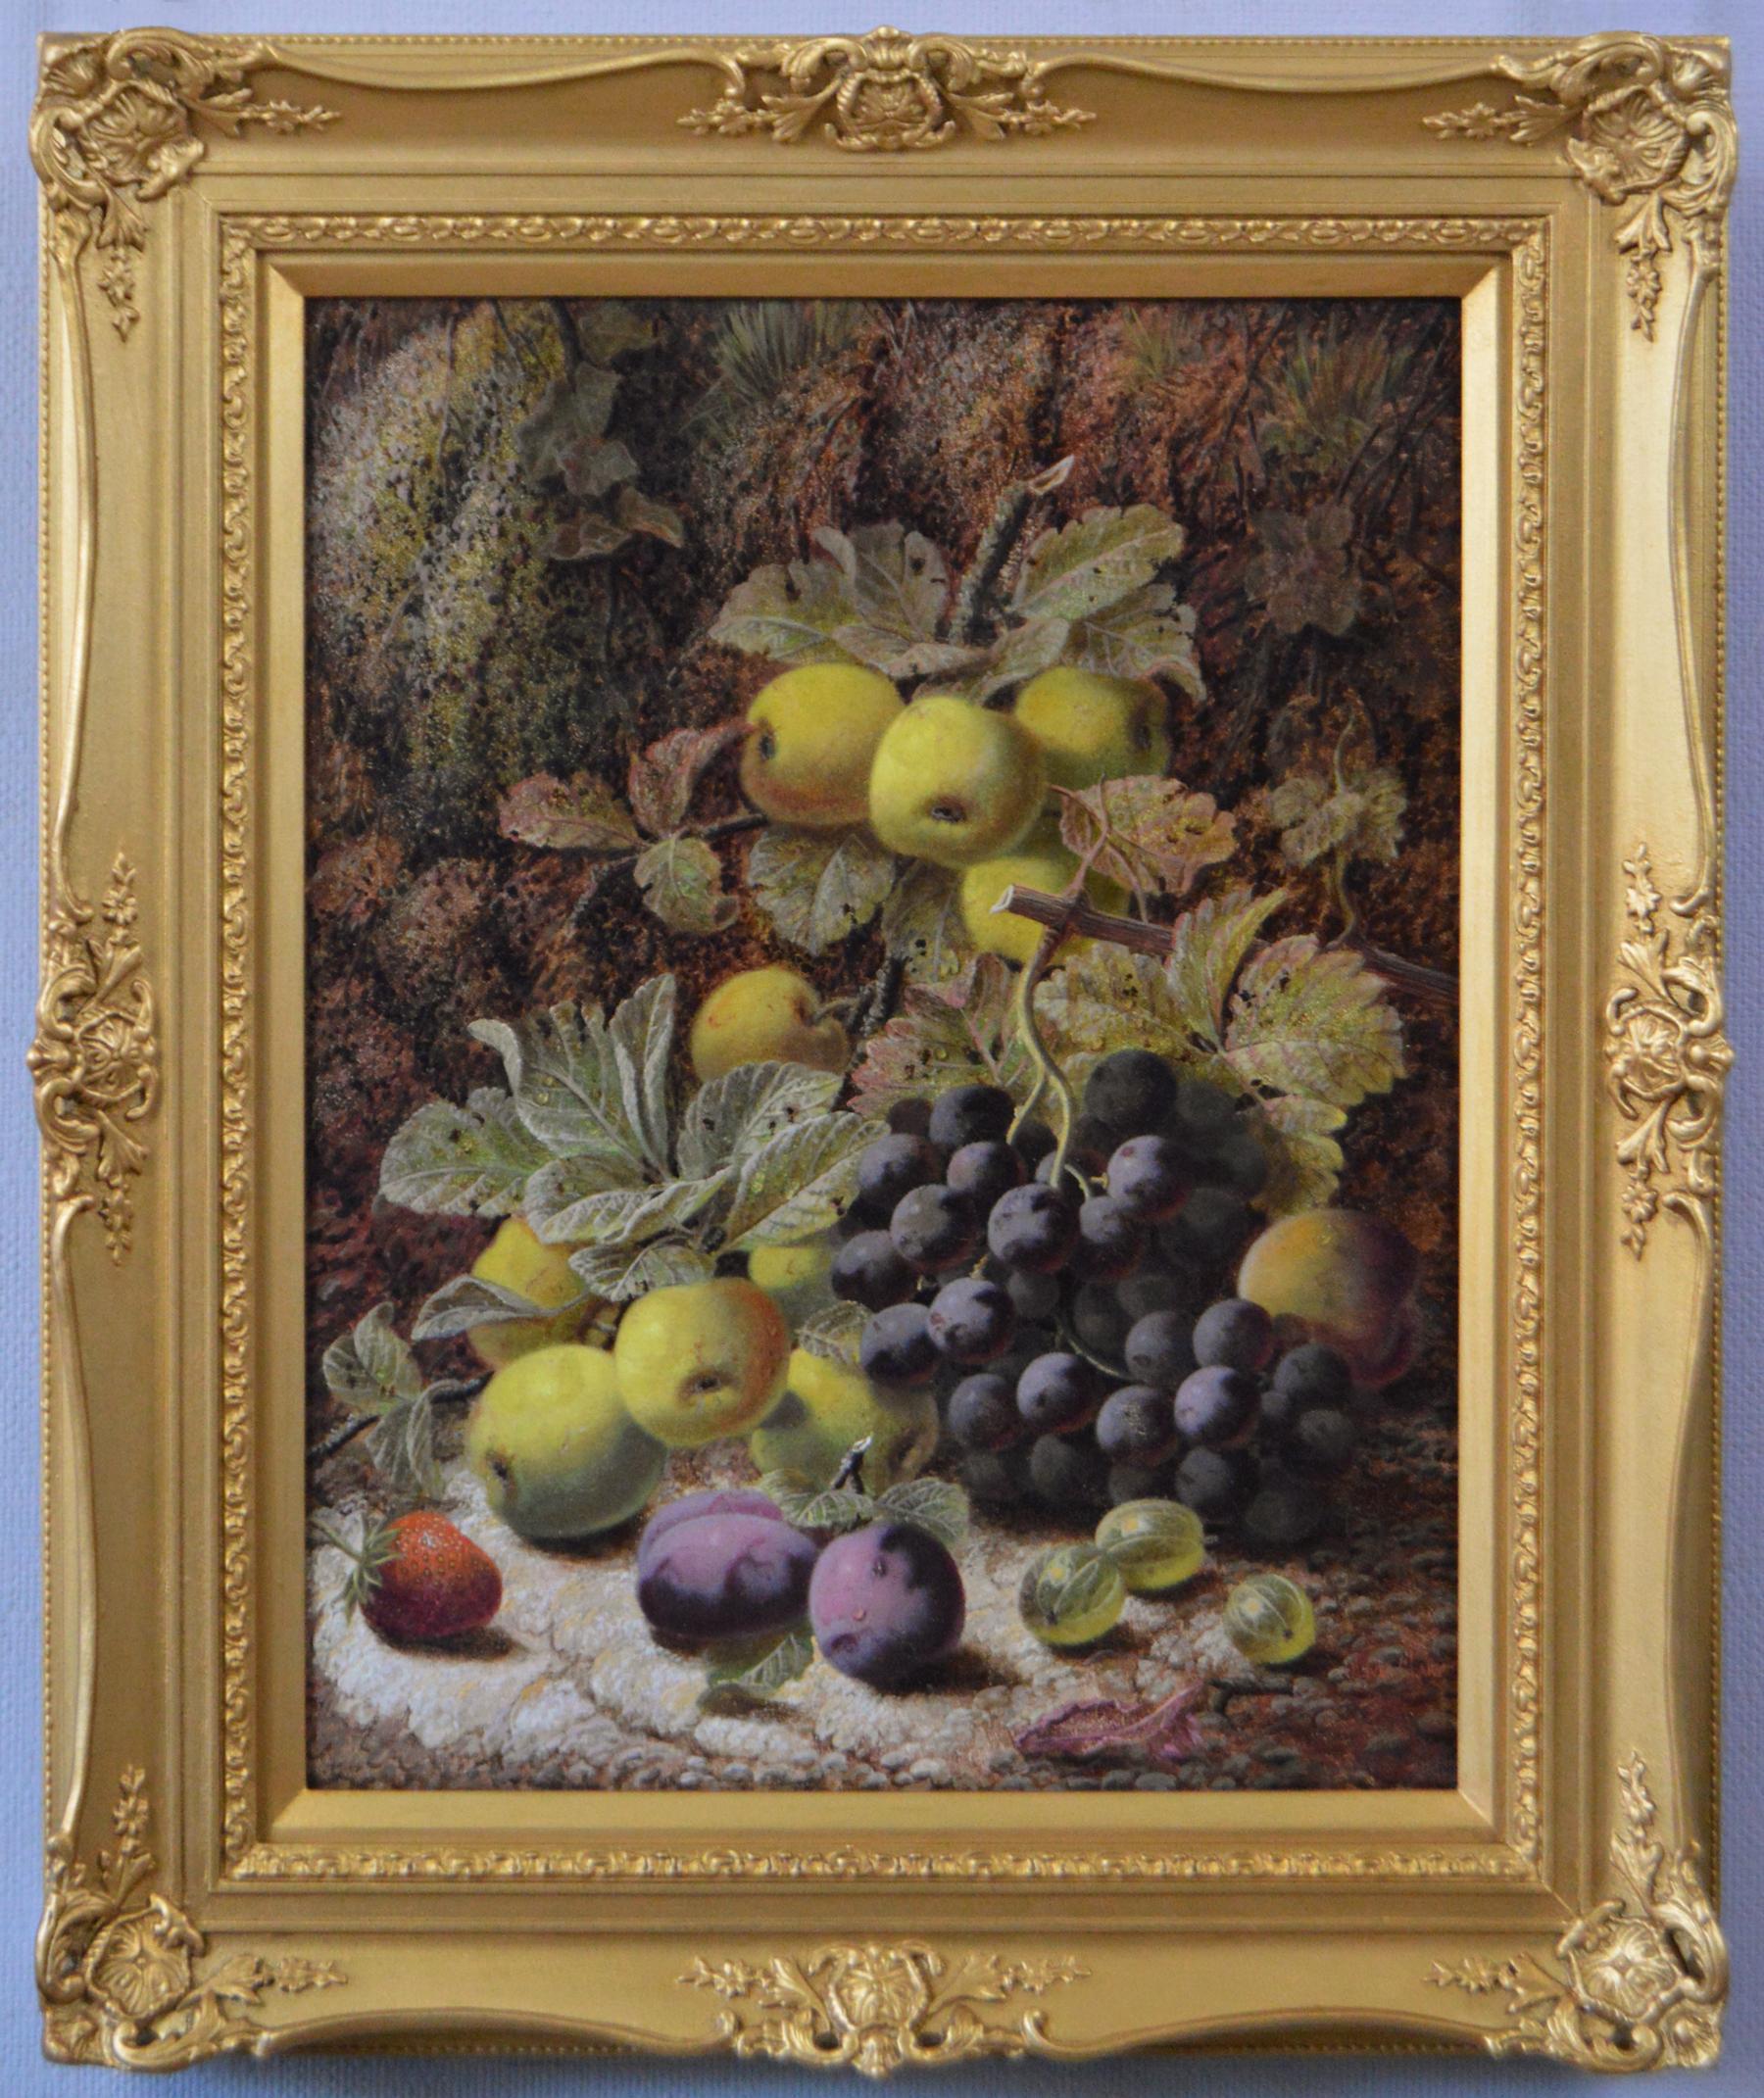 19th Century still life oil painting of apples, grapes & other fruit